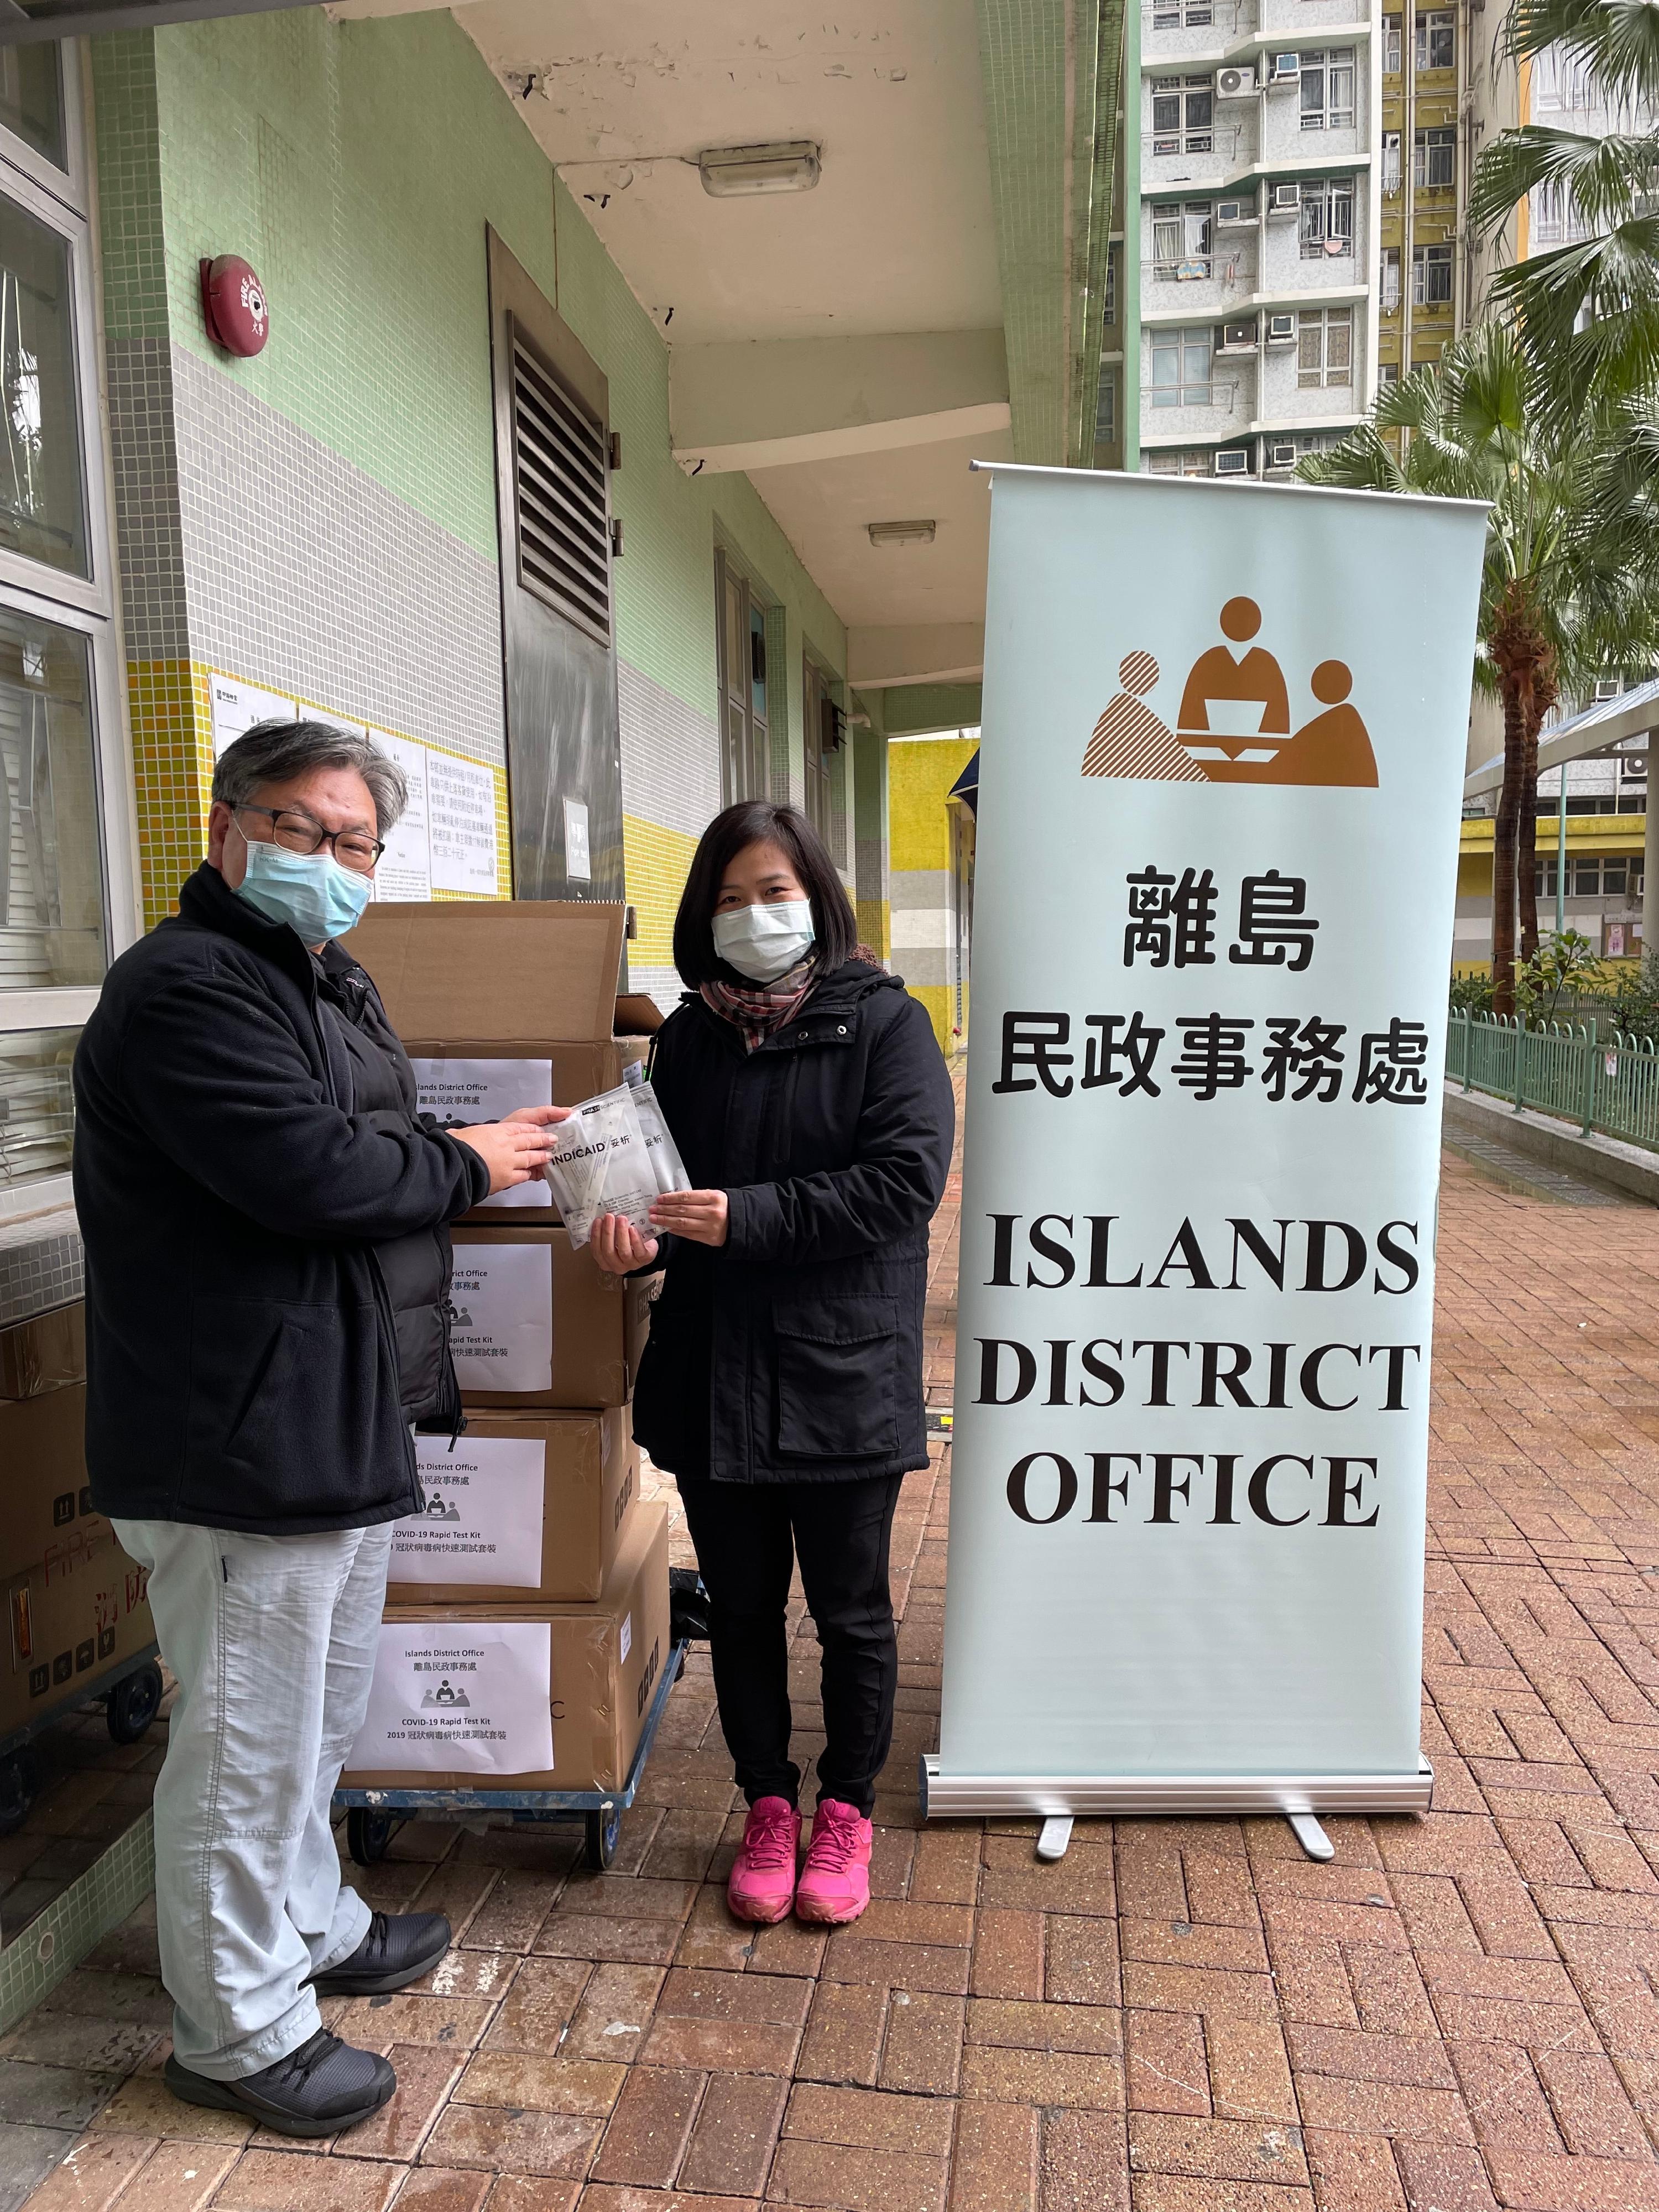 The Islands District Office today (February 22) distributed rapid test kits to households, cleansing workers and property management staff living and working in Ying Yat House of Yat Tung (1) Estate for voluntary testing through the property management company.